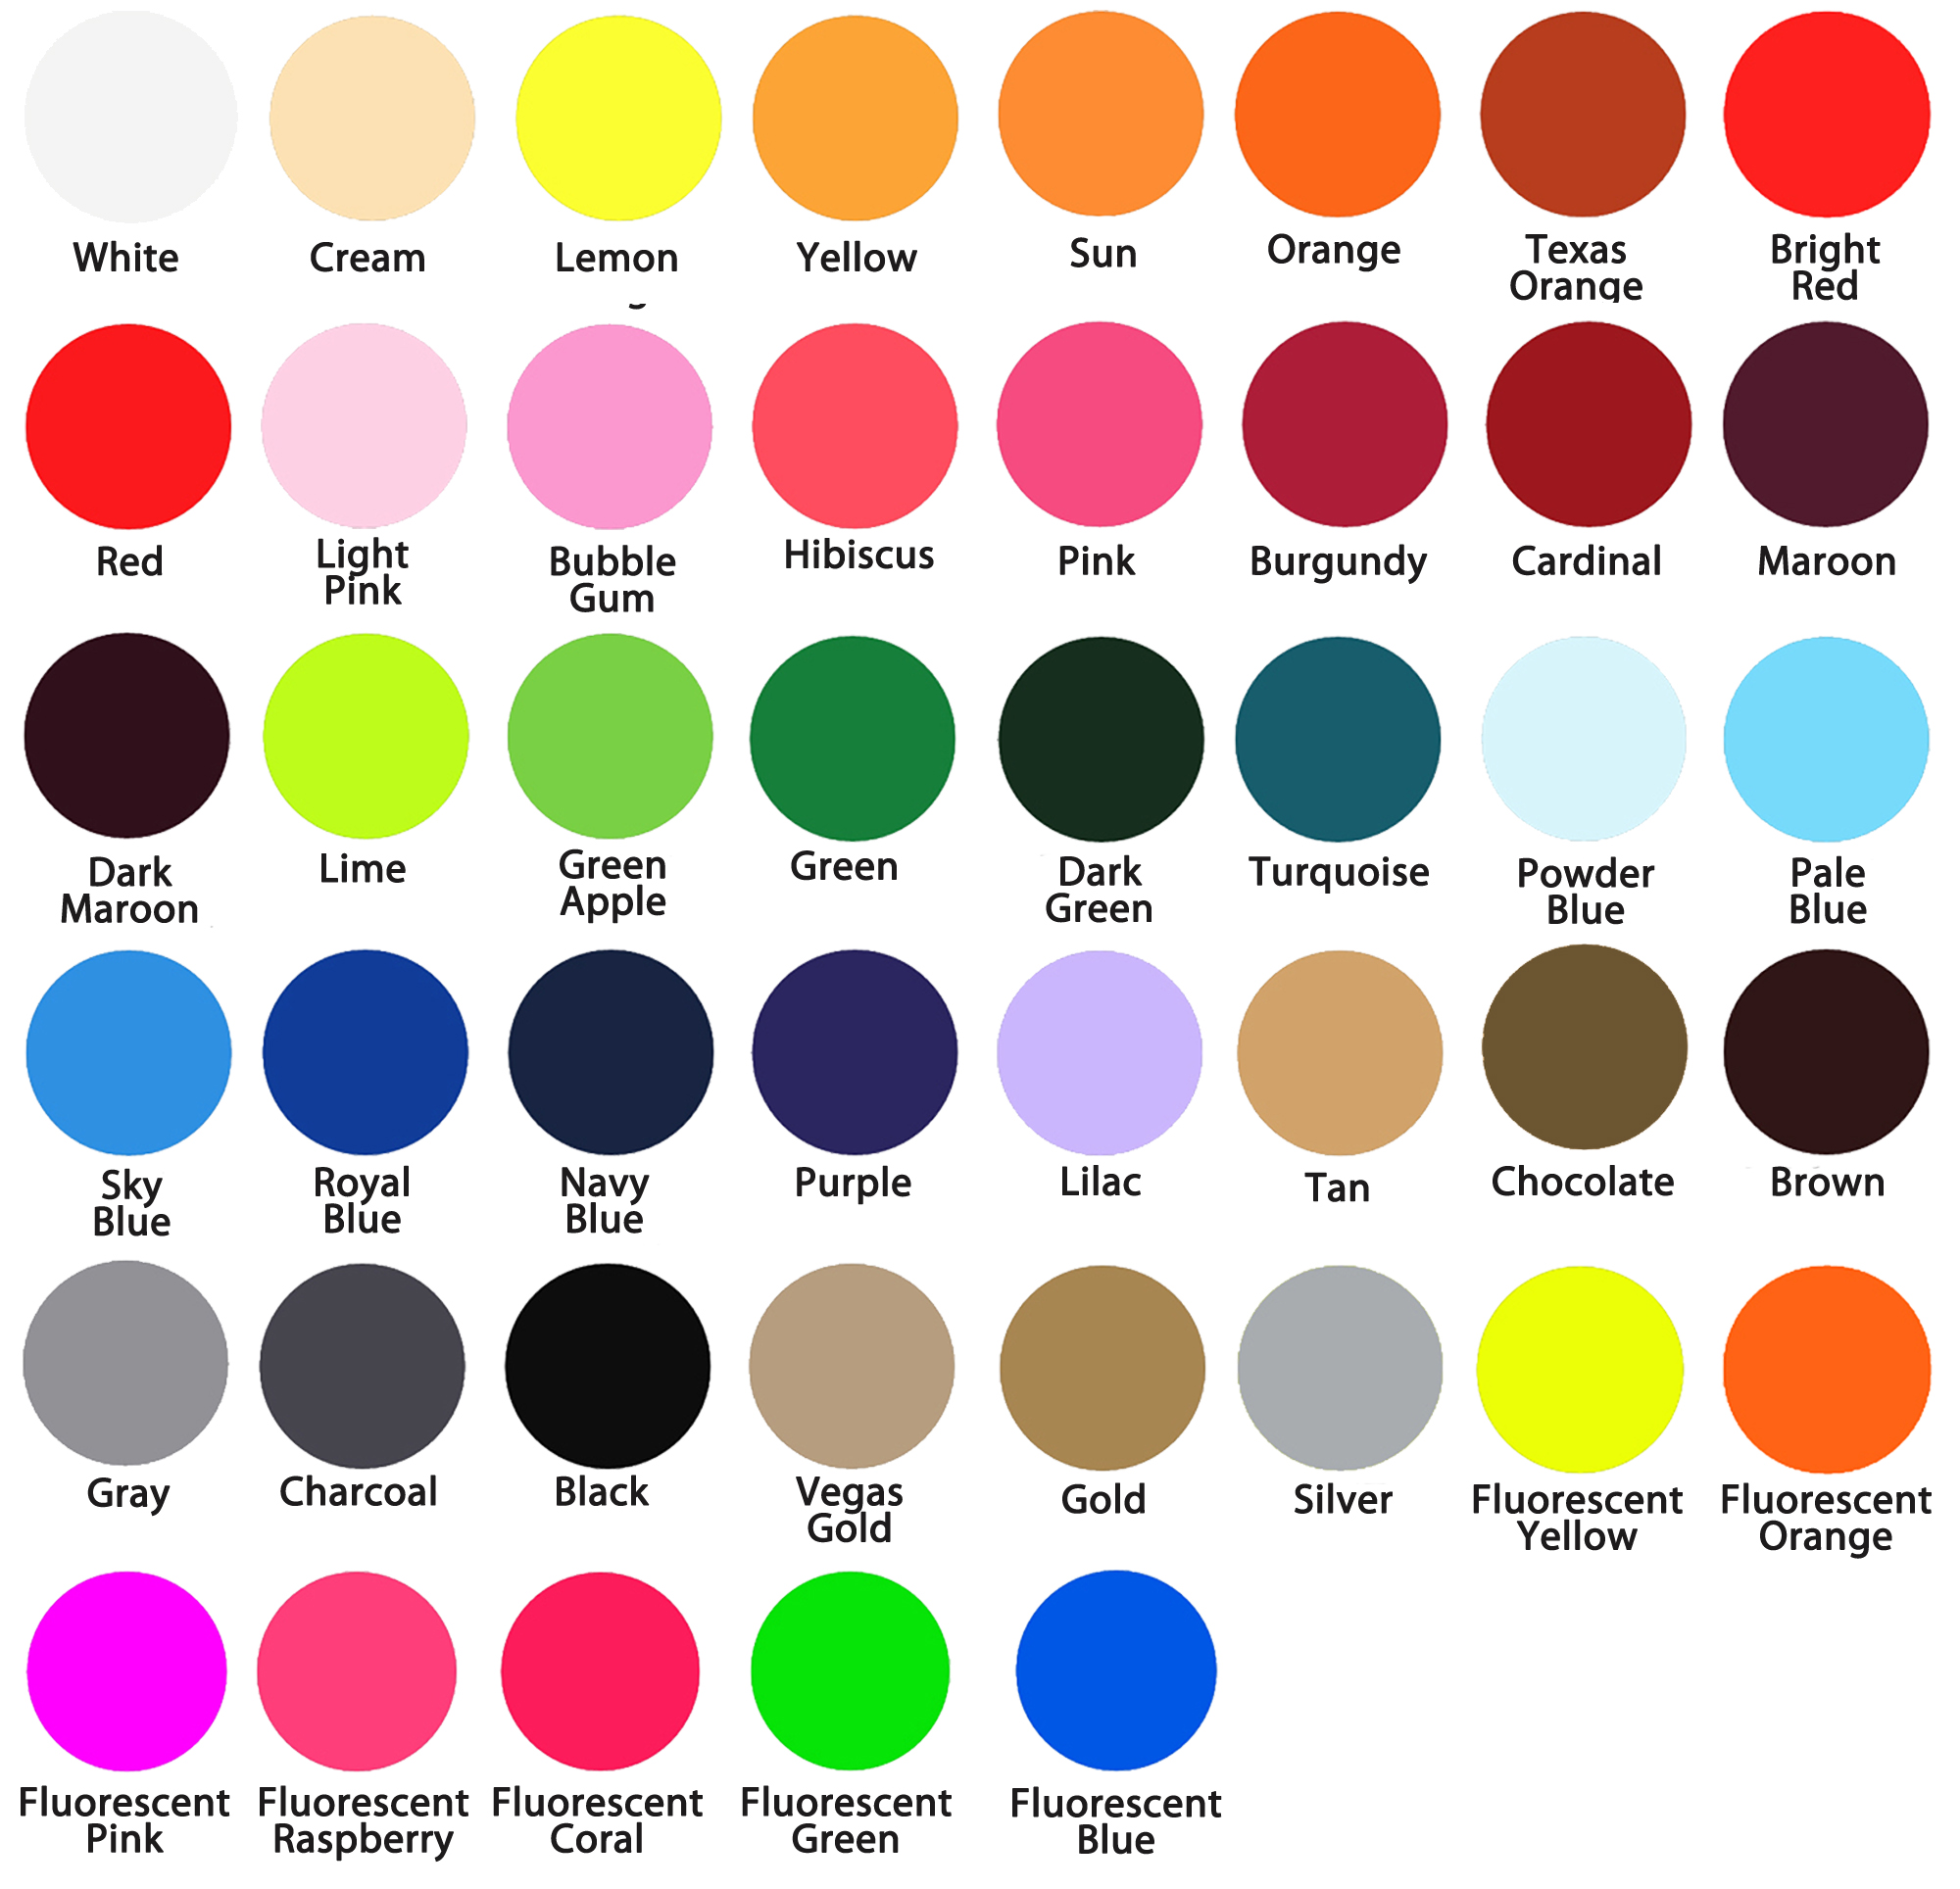 Siser Easyweed Stretch Color Chart